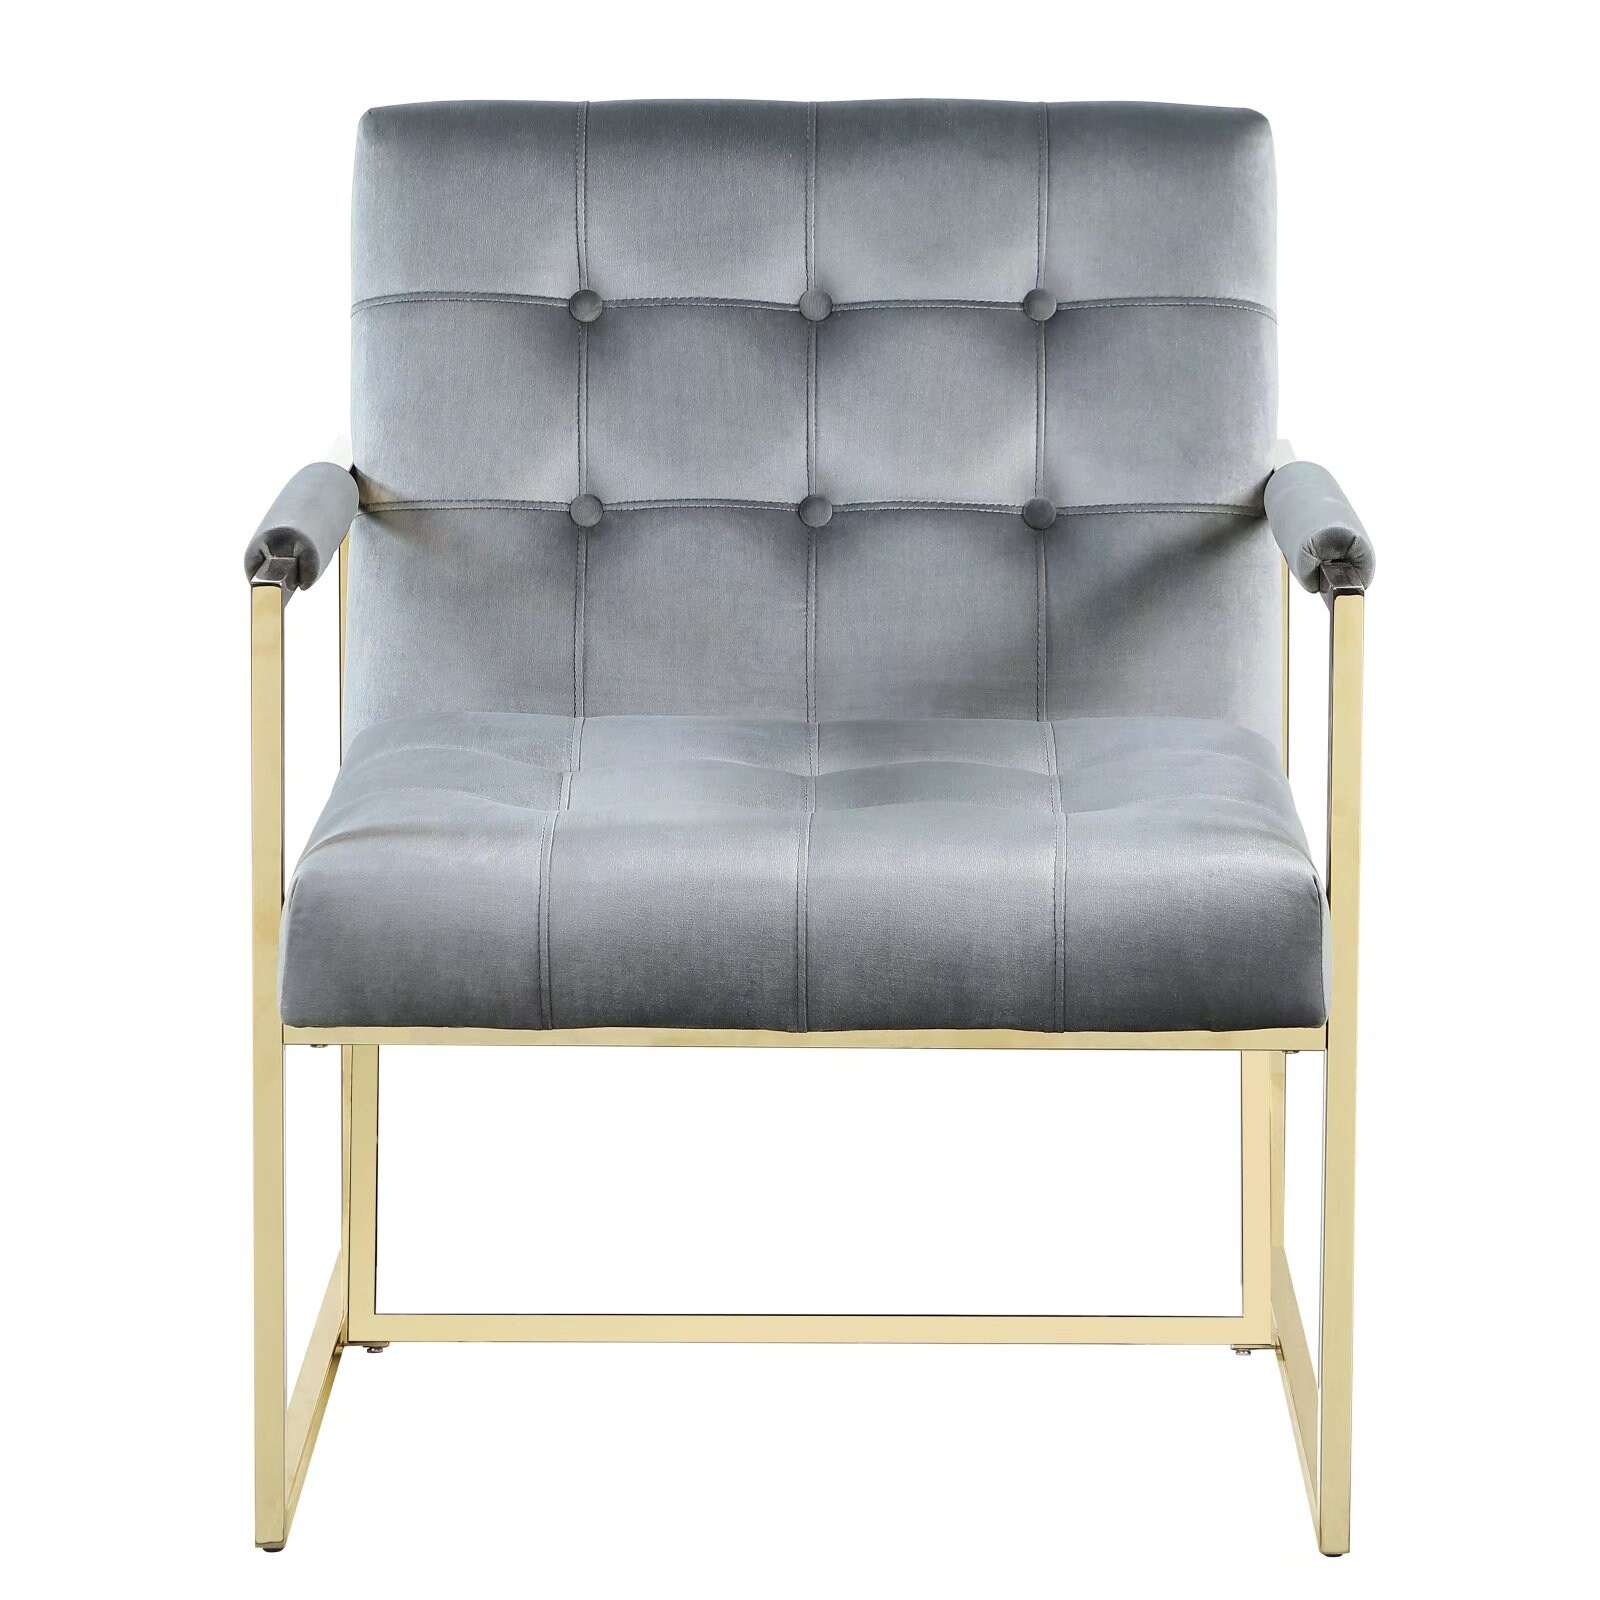 Modern Single Sofa Chair, Upholstered Accent Living Room Chair, Comfy Armchair with Golden Metal Legs